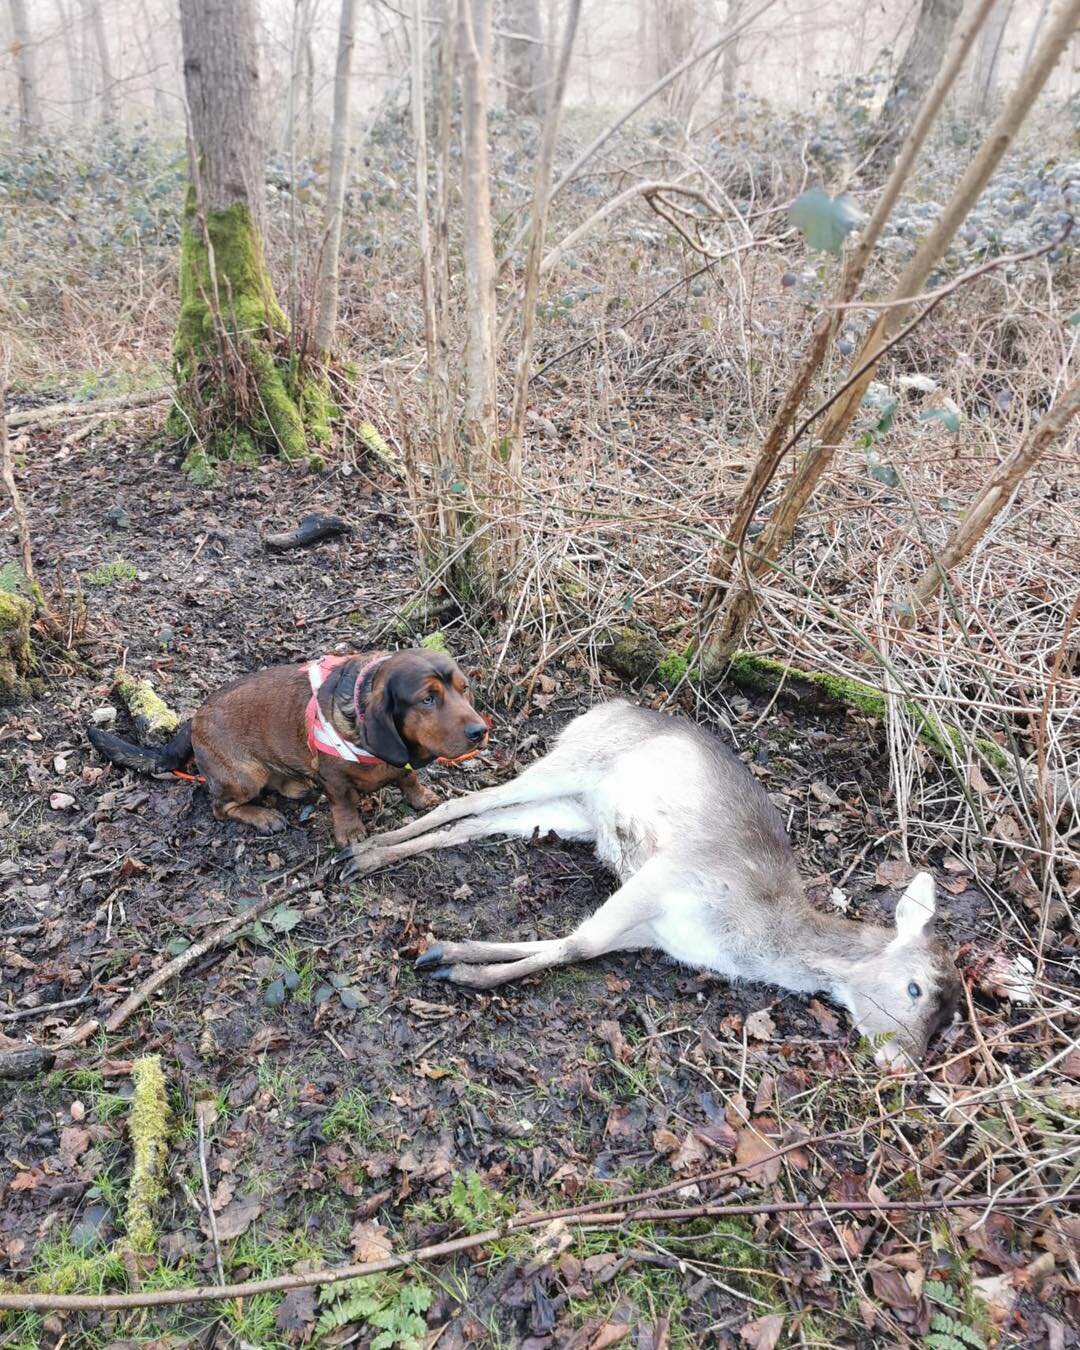 Good result for one of the tracking teams this morning .
Deer was shot late yesterday afternoon and ran..
The stalker found a single drop of blood and decided to pull out incase and called for assistance..🦌🐕
Sarbjit Marwaha &amp; Thor arrived this 